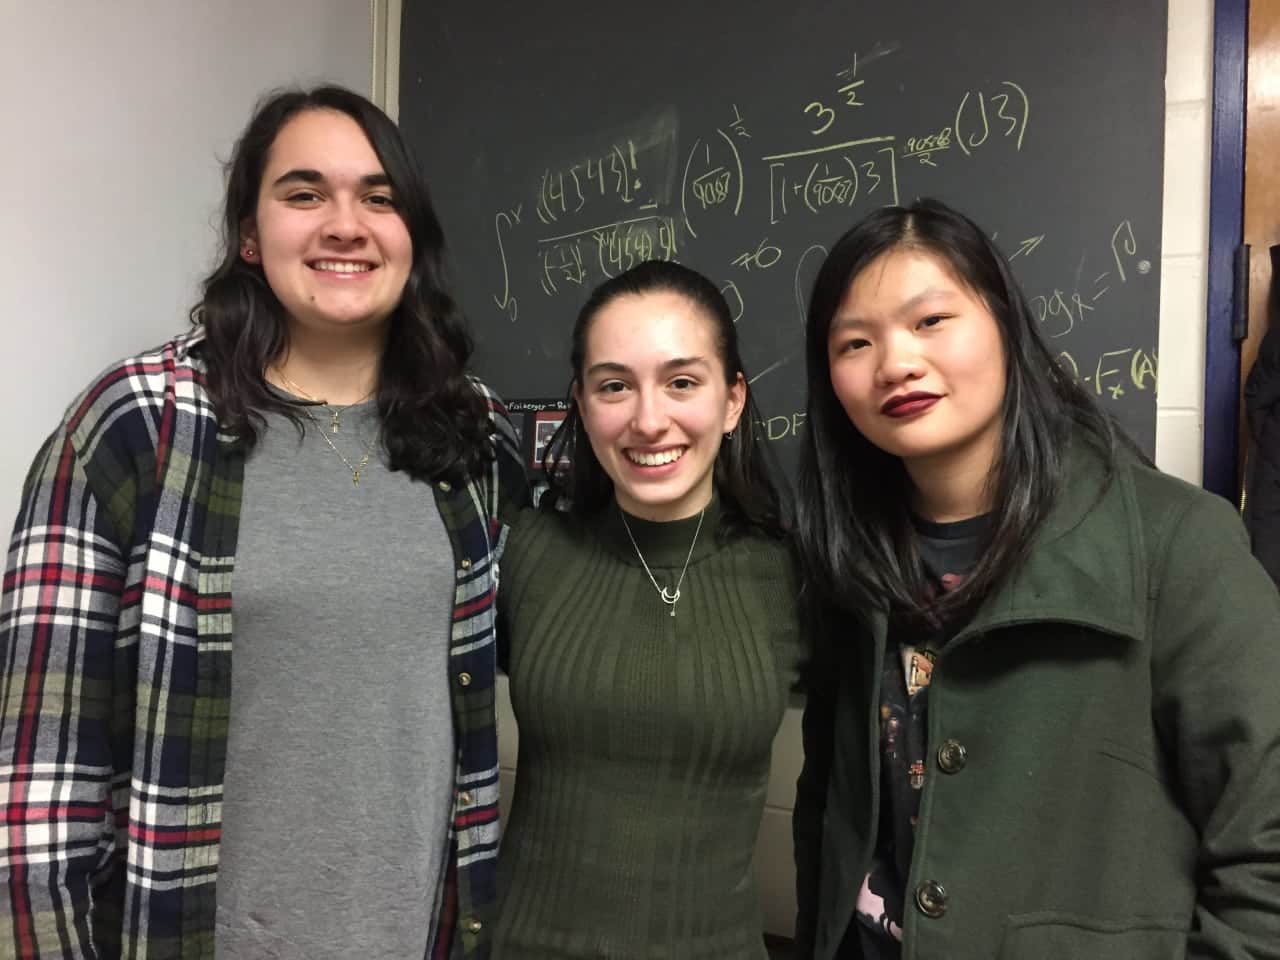 Left to right: Byram Hills High School seniors Yasamin Bayley, Audrey Saltzman and Isabelle Chong. The students were named Regeneron semifinalists.